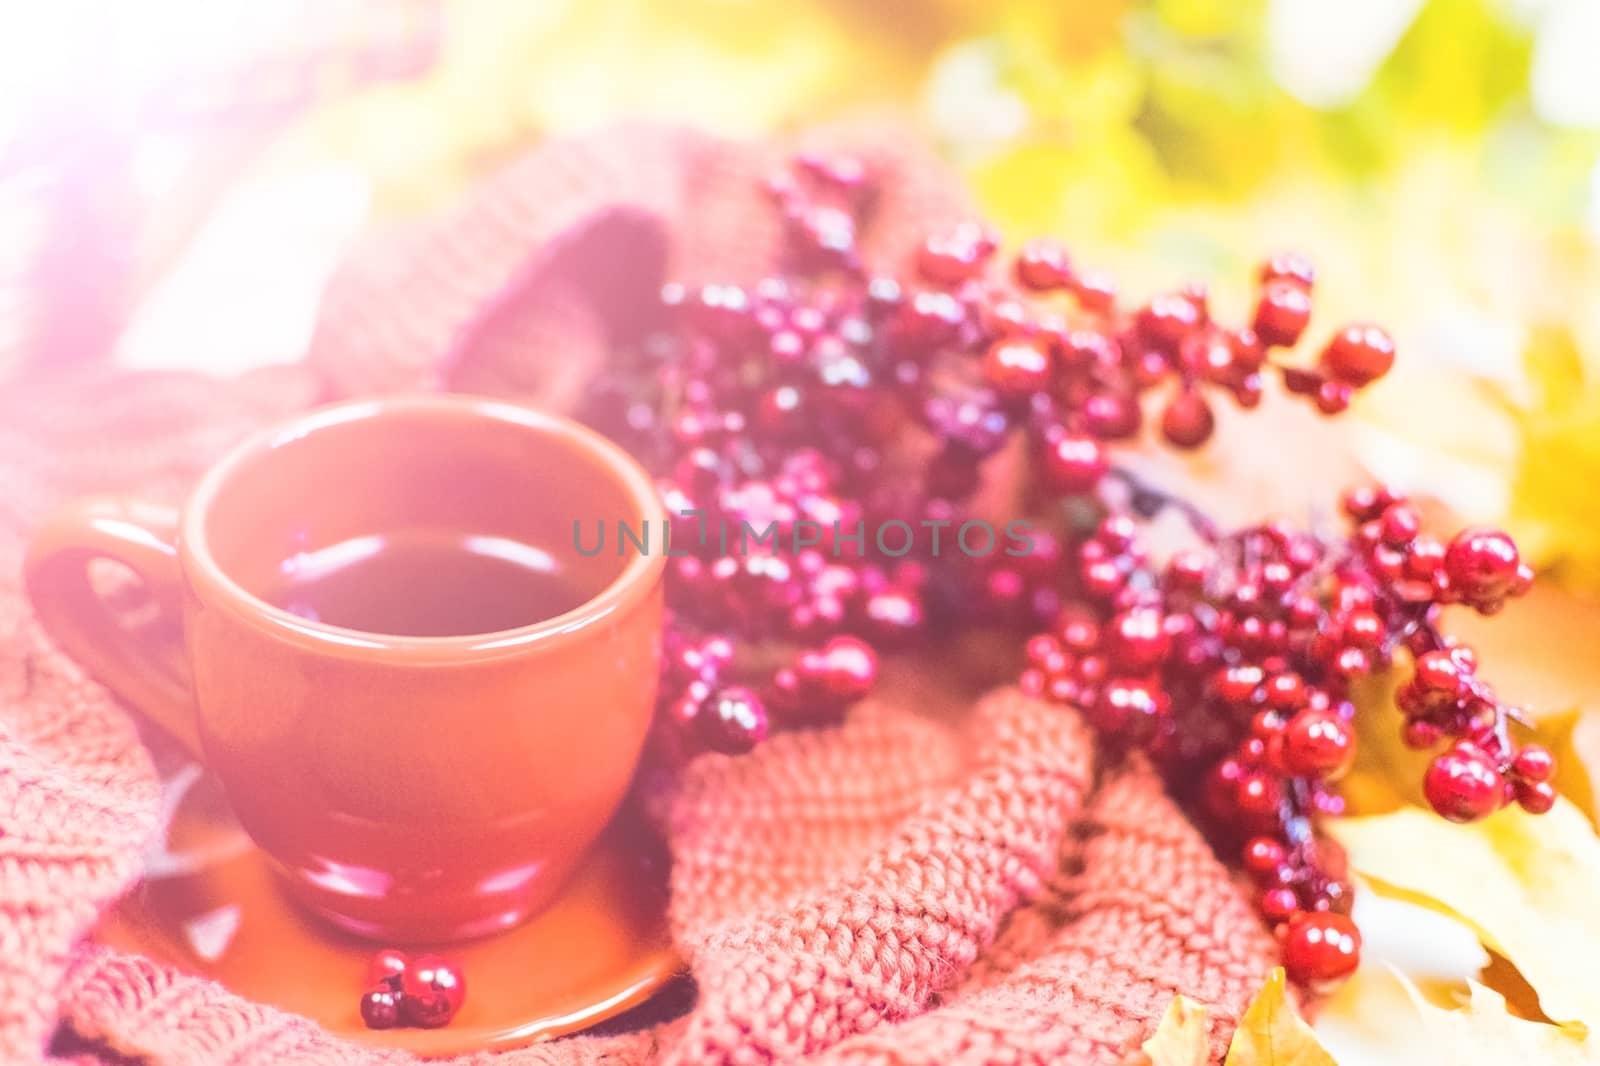 Cup of tea, autumn leaves, red scarf. Still life.